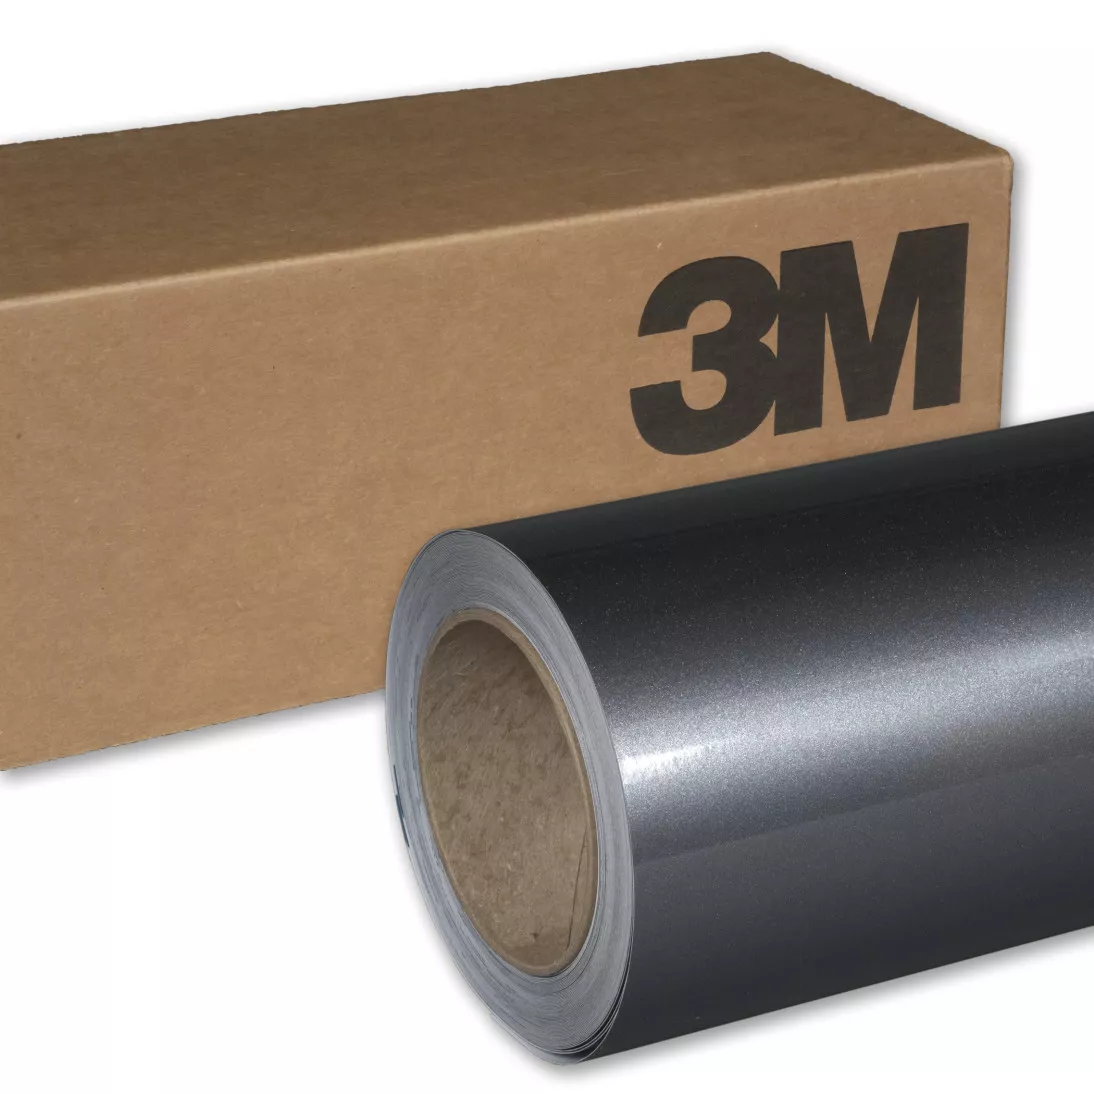 3M™ Wrap Film Series 1080-G201, Gloss Anthracite, 60 in x 50 yd